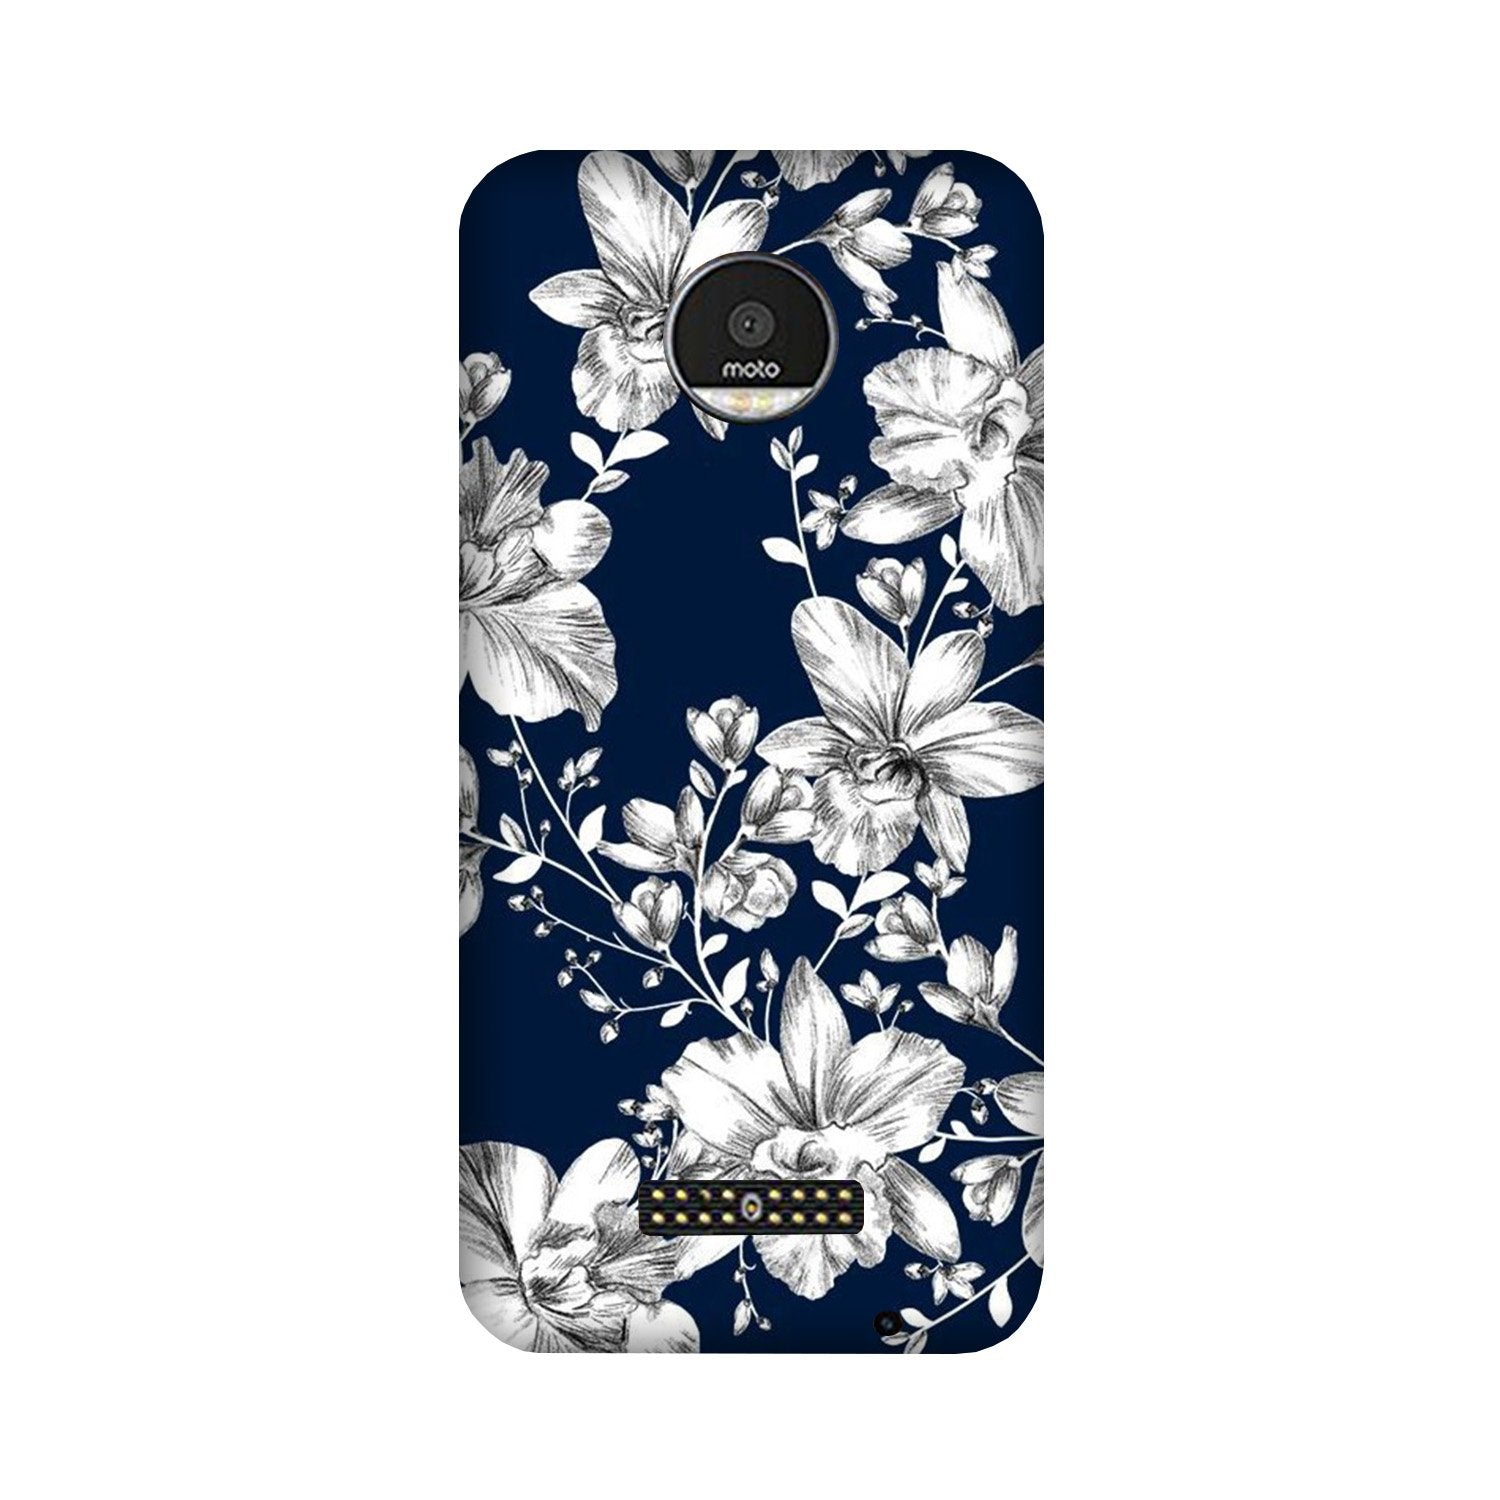 White flowers Blue Background Case for Moto Z2 Play